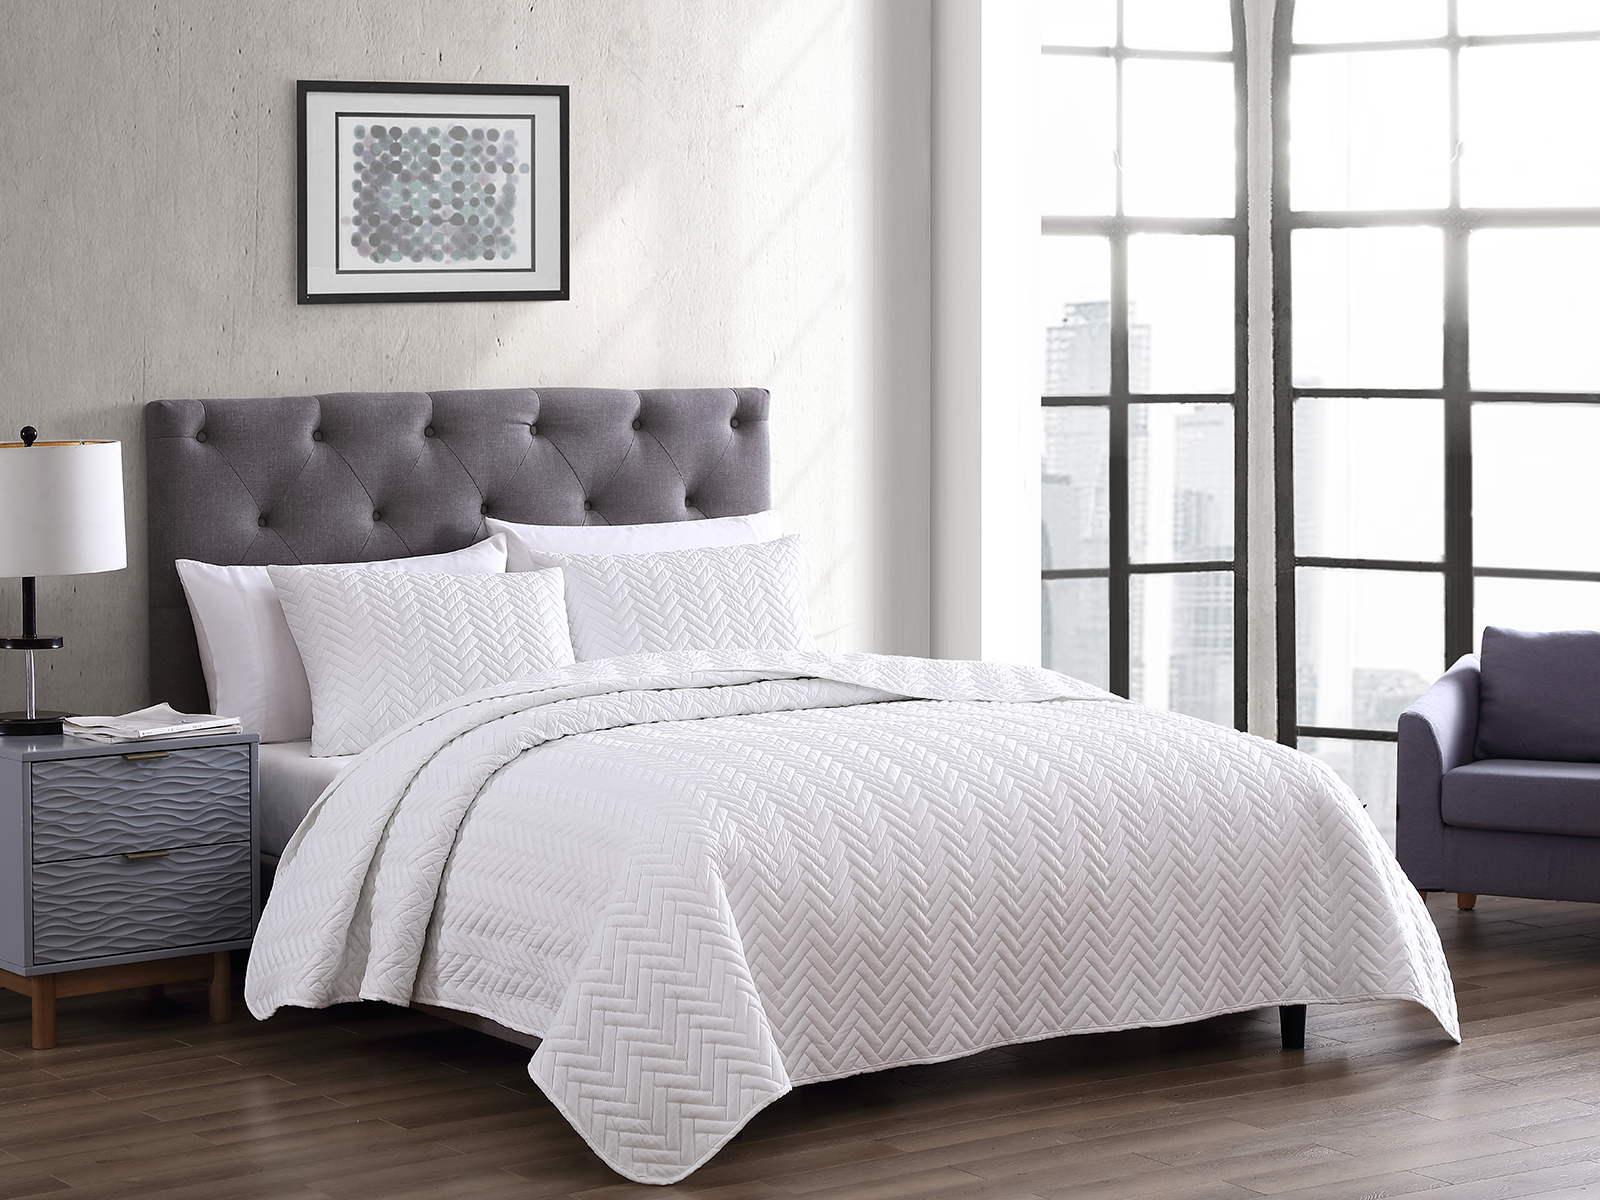 The Nesting Company Queen Birch Quilt Set | White